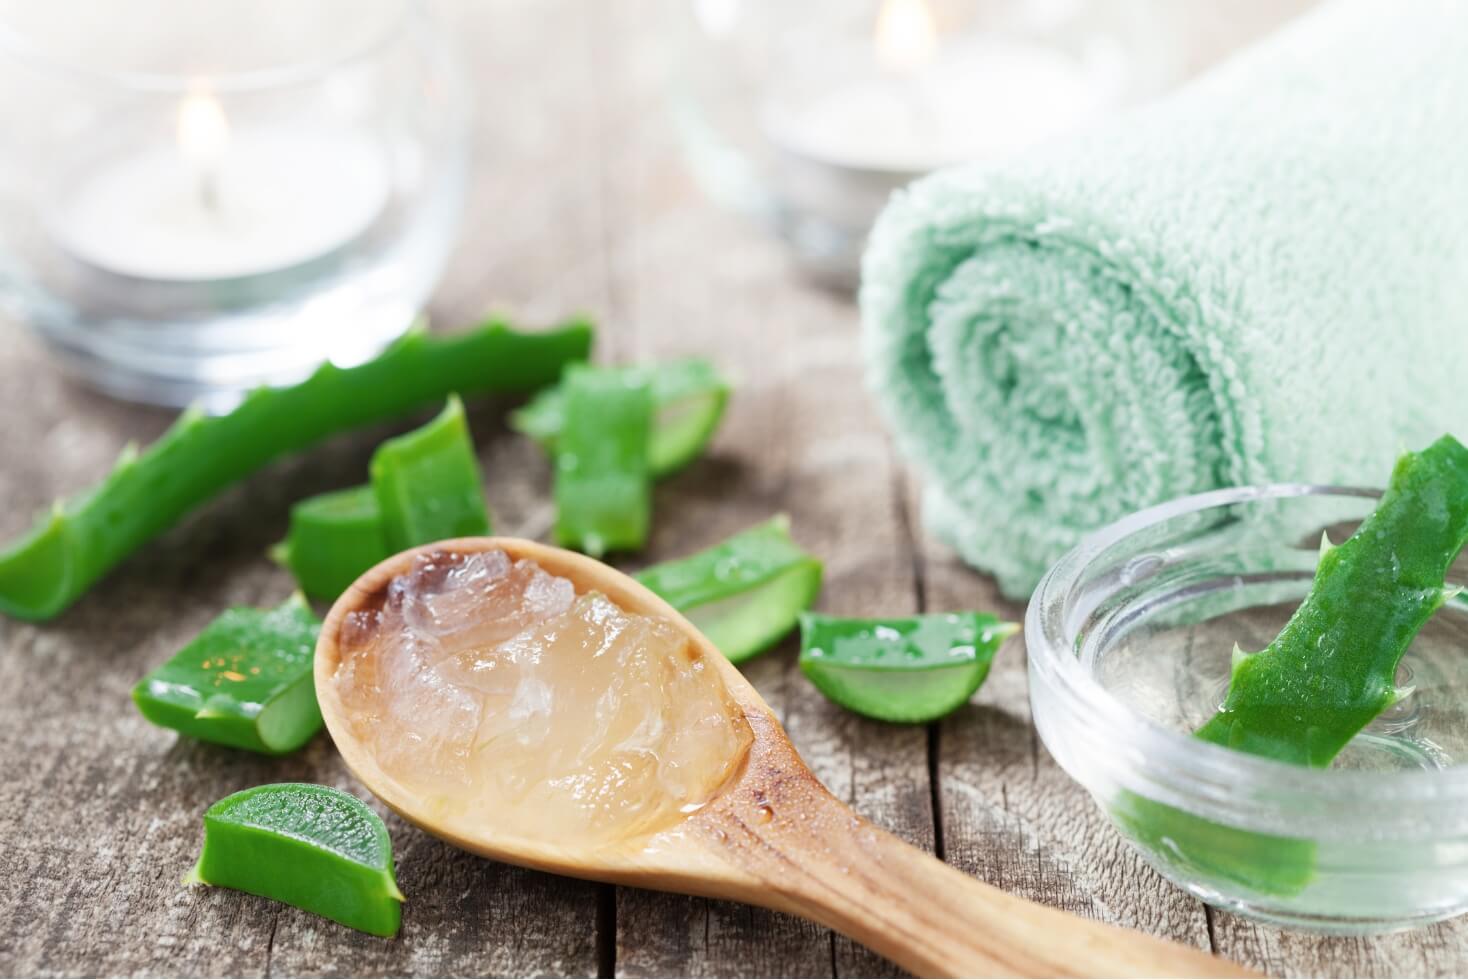 Is Aloe Vera Good for Low Porosity Hair OR Can It Dry Out Your Hair?